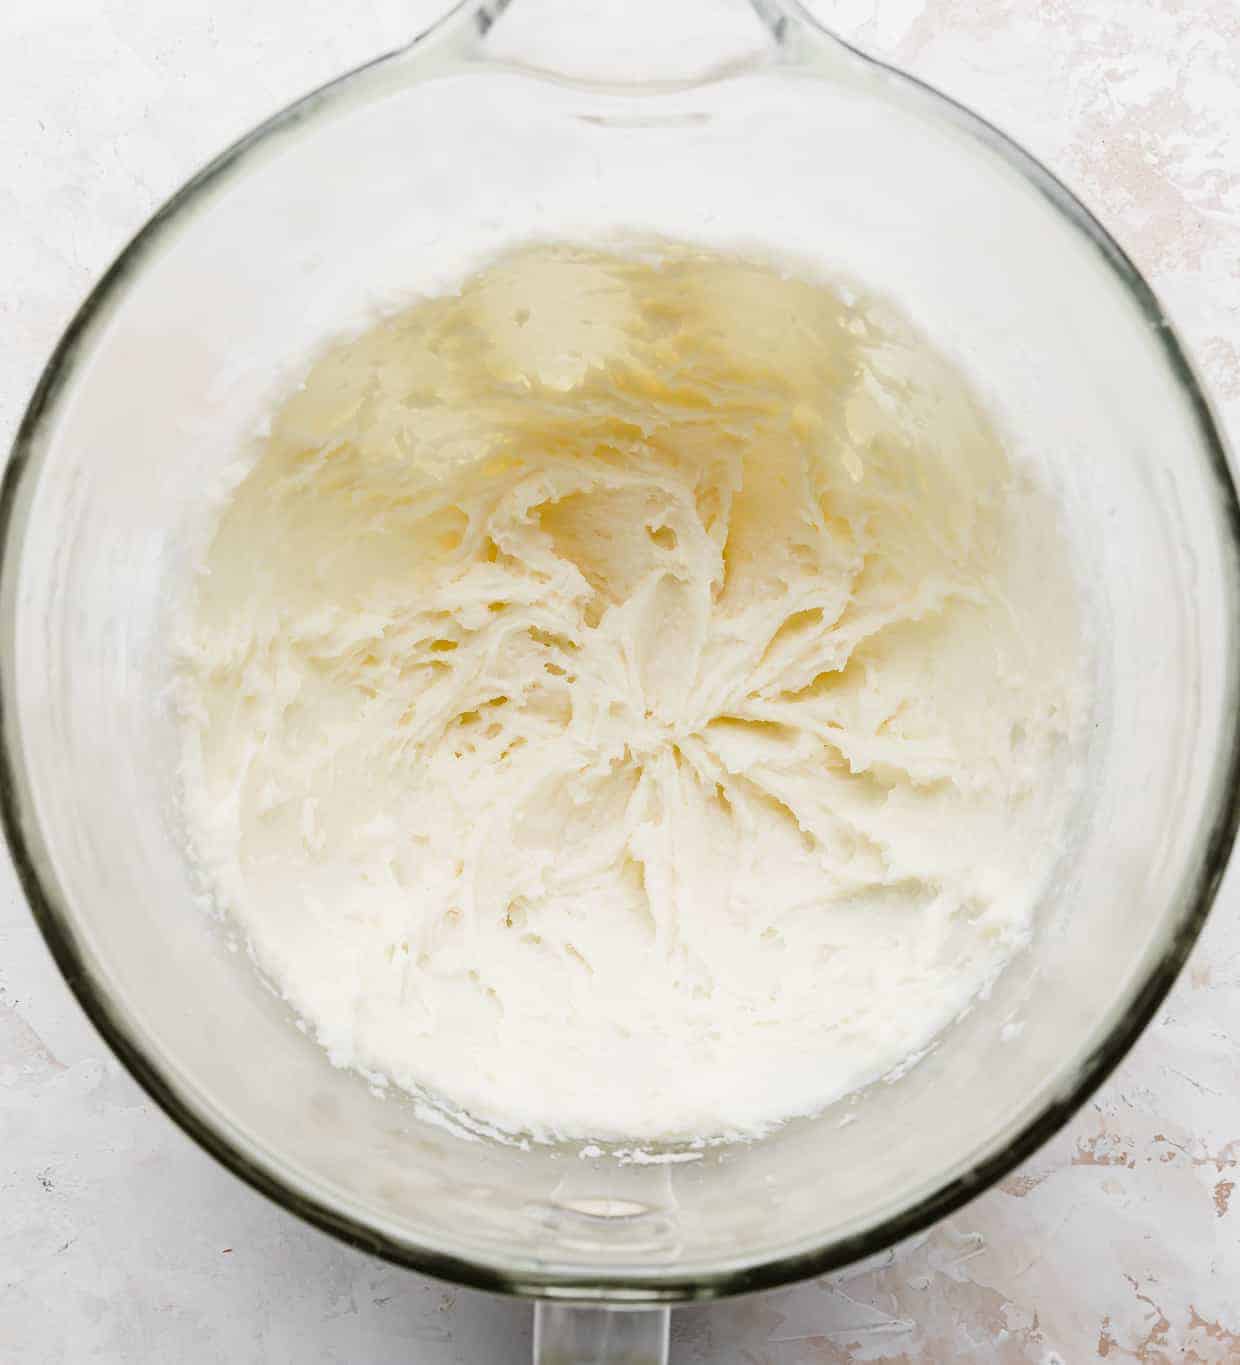 Creamed sugar and cream cheese in a glass mixing bowl.